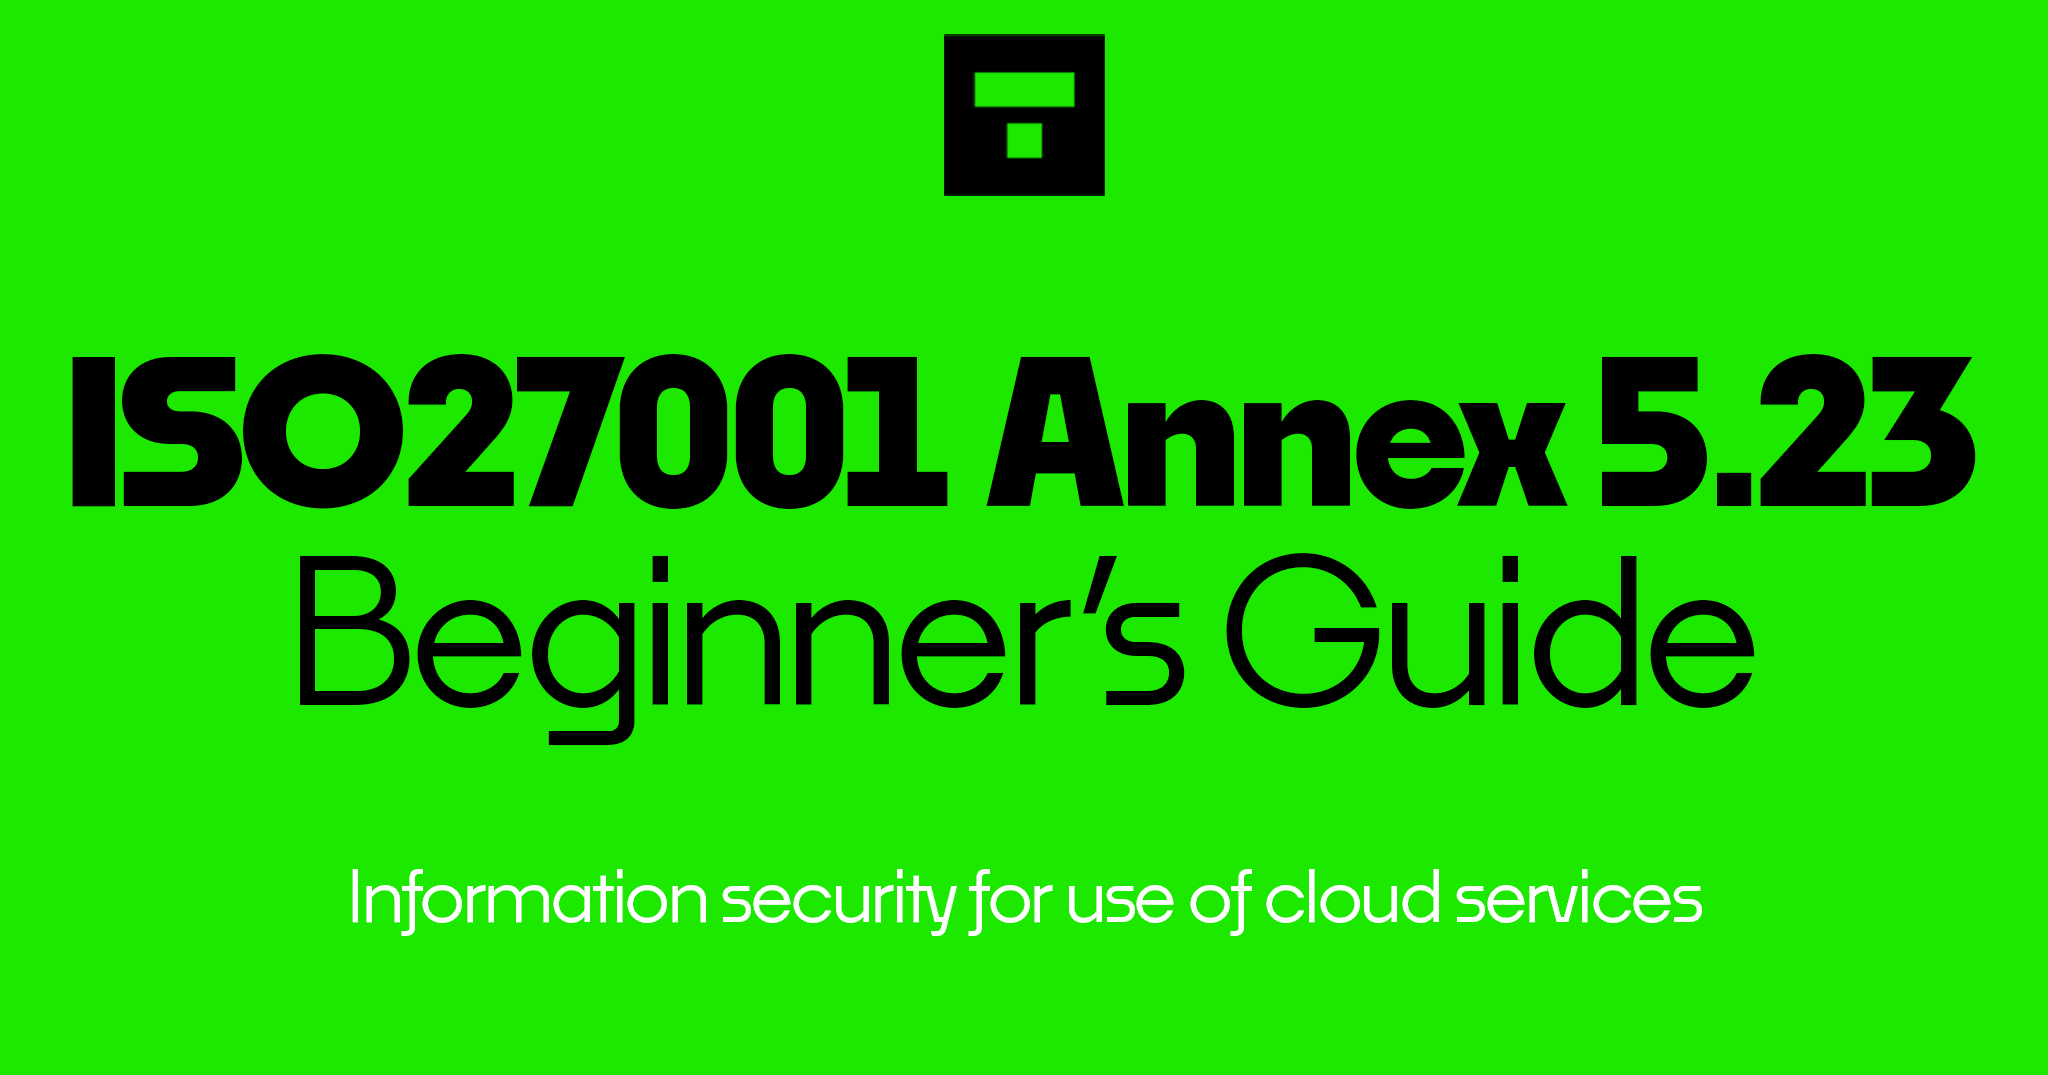 How To Implement ISO 27001 Annex A 5.23 Information Security For Use Of Cloud Services